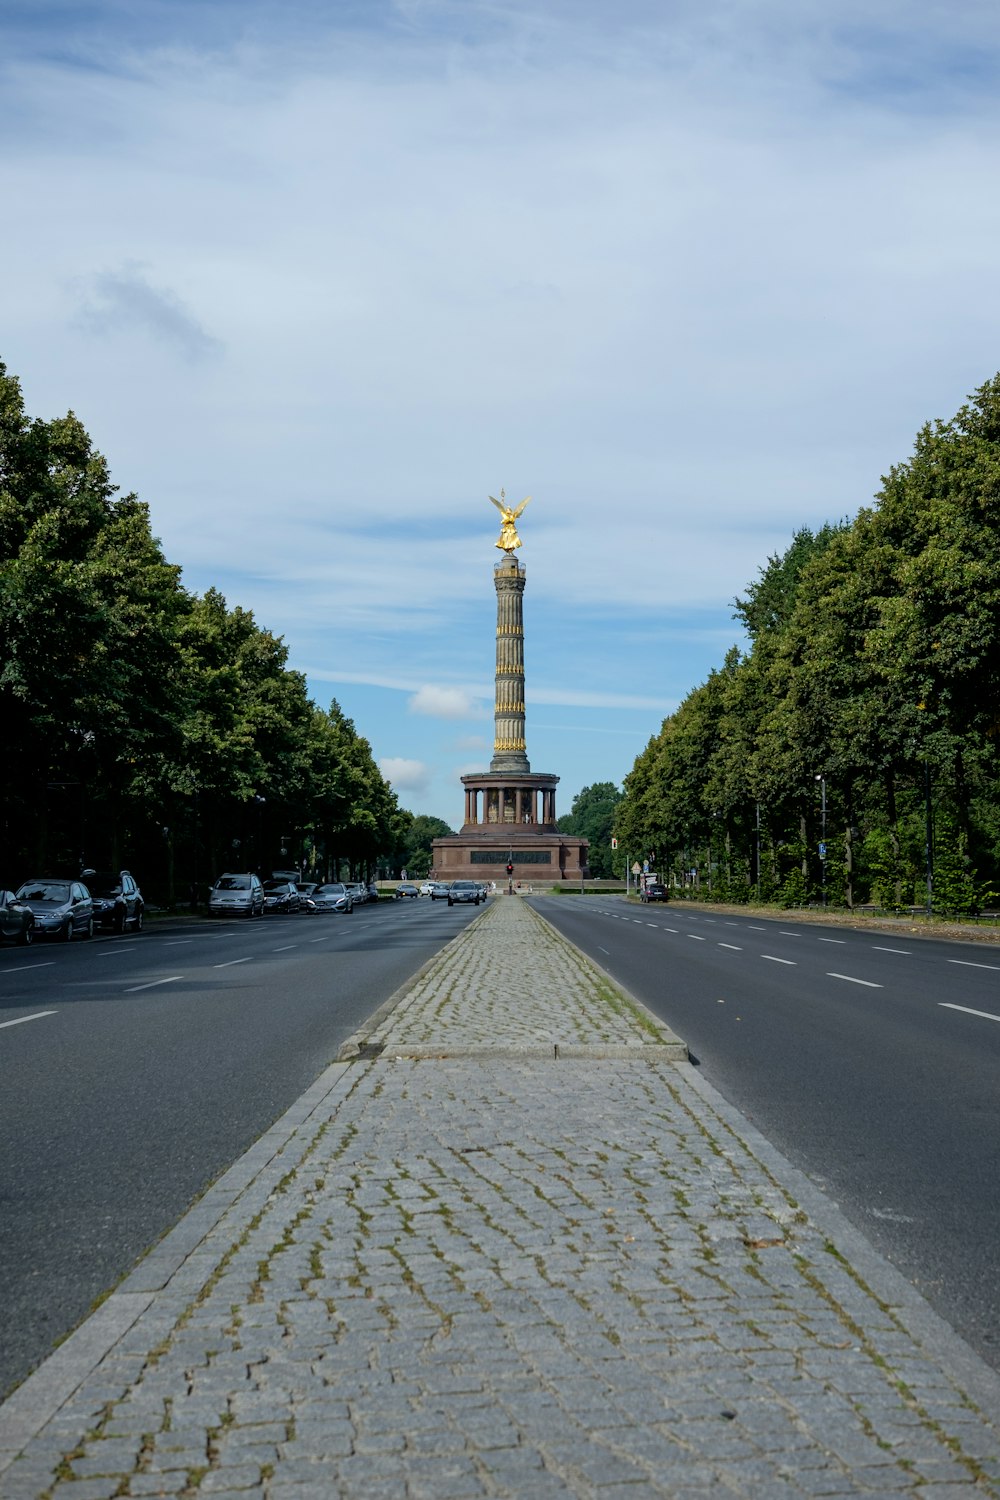 a view of a street with a monument in the background